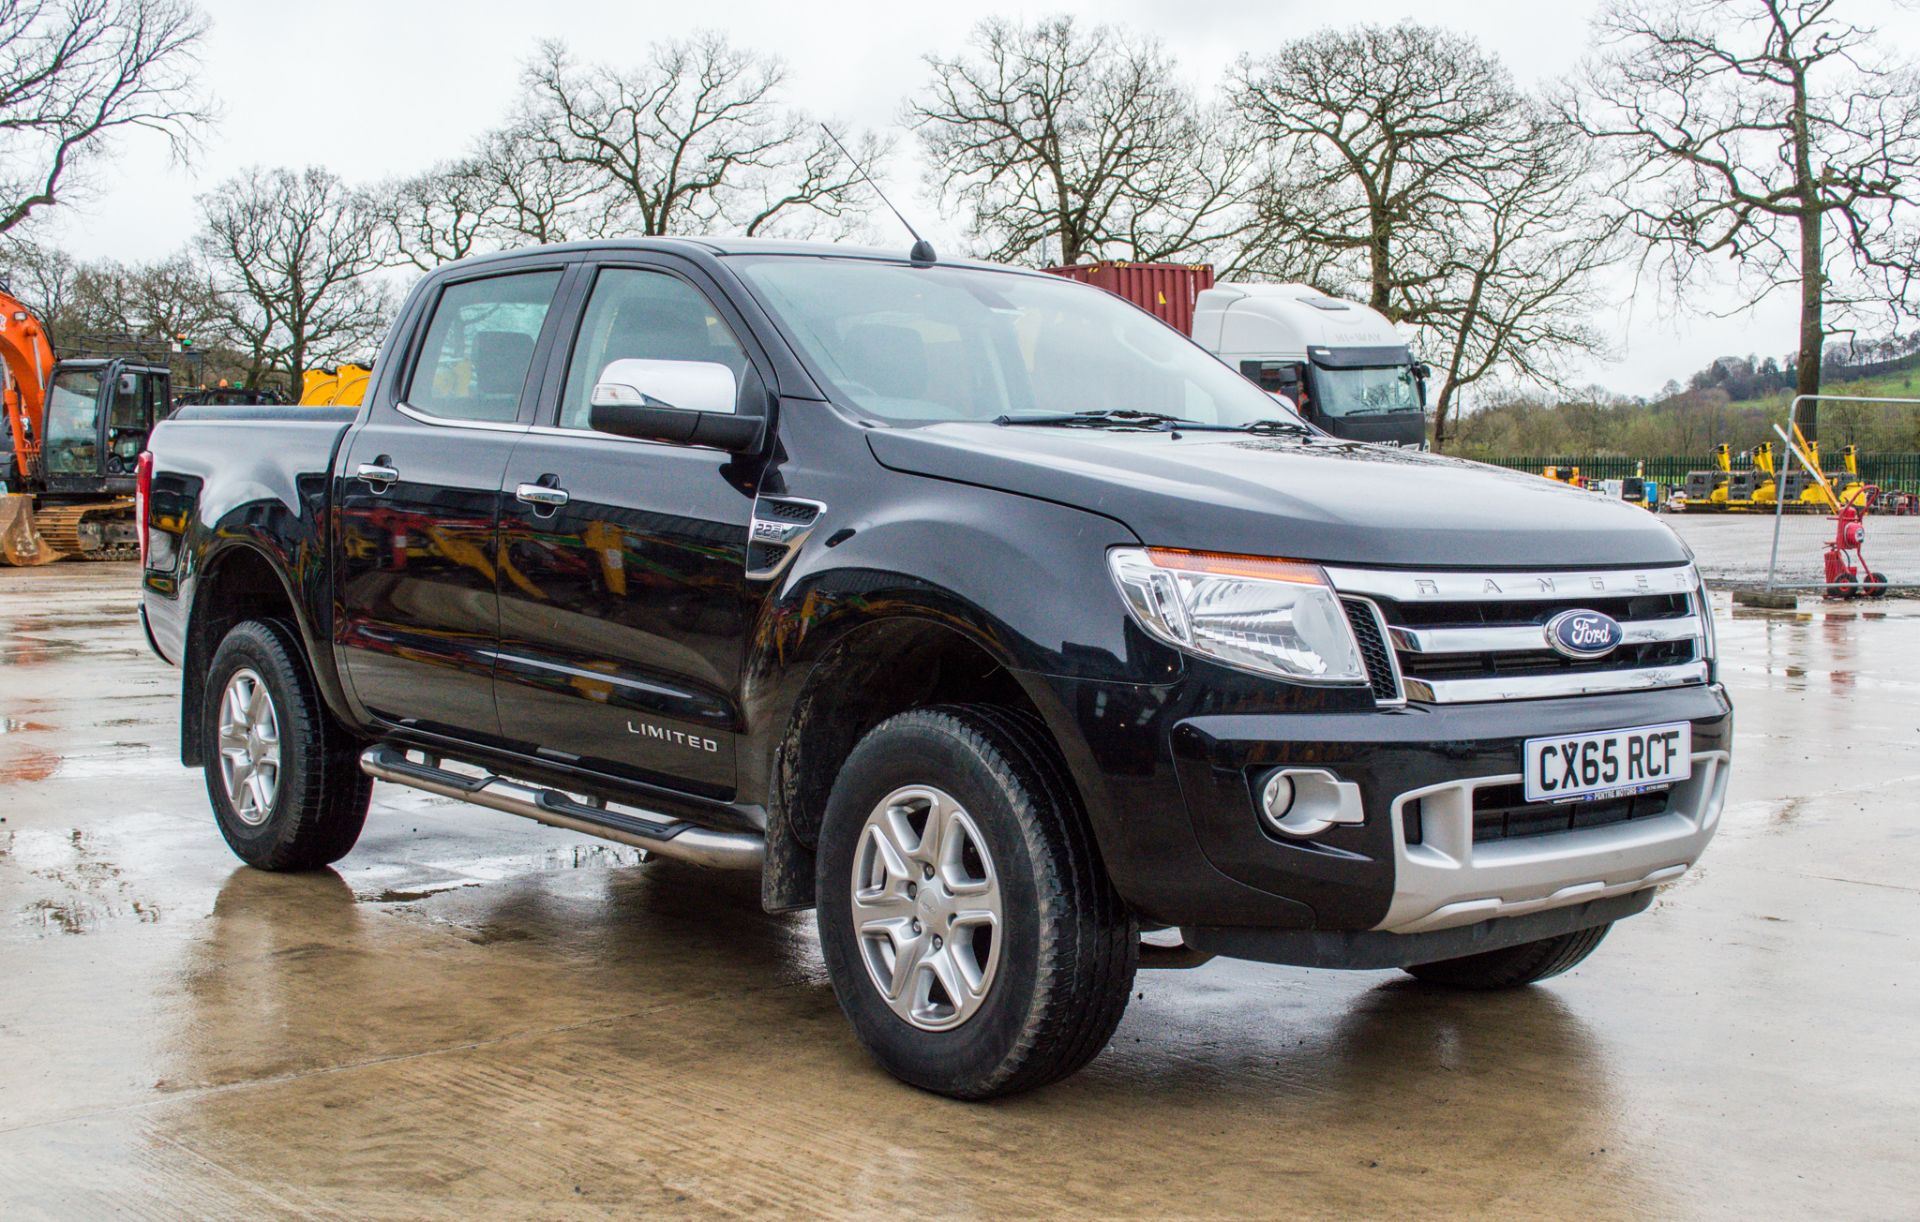 Ford Ranger 2.2 TDCI 150 Limited 4wd automatic double cab pick up - Image 2 of 28